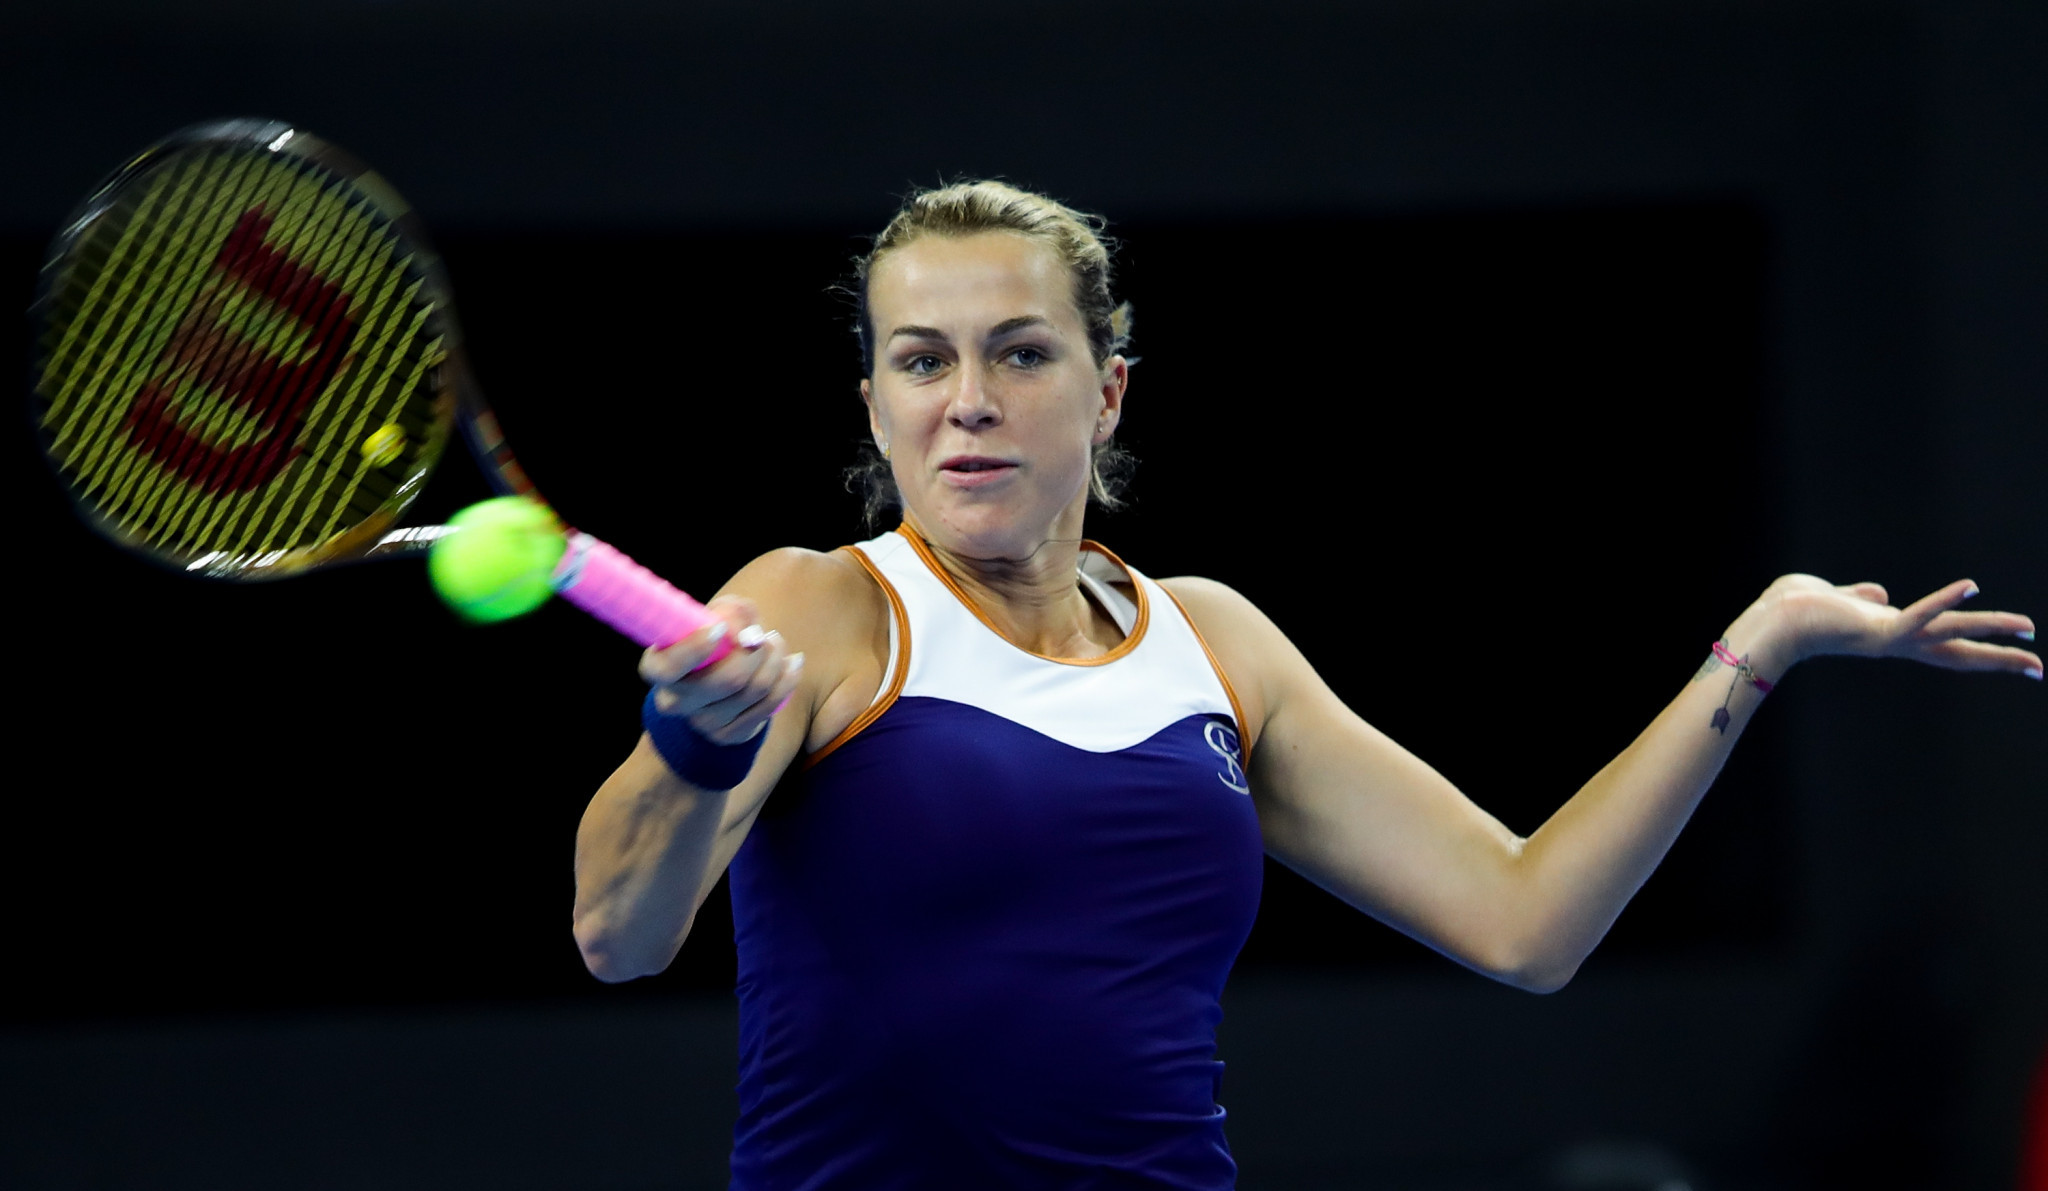 Pavlyuchenkova wins on home soil as WTA Kremlin Cup opens in Moscow